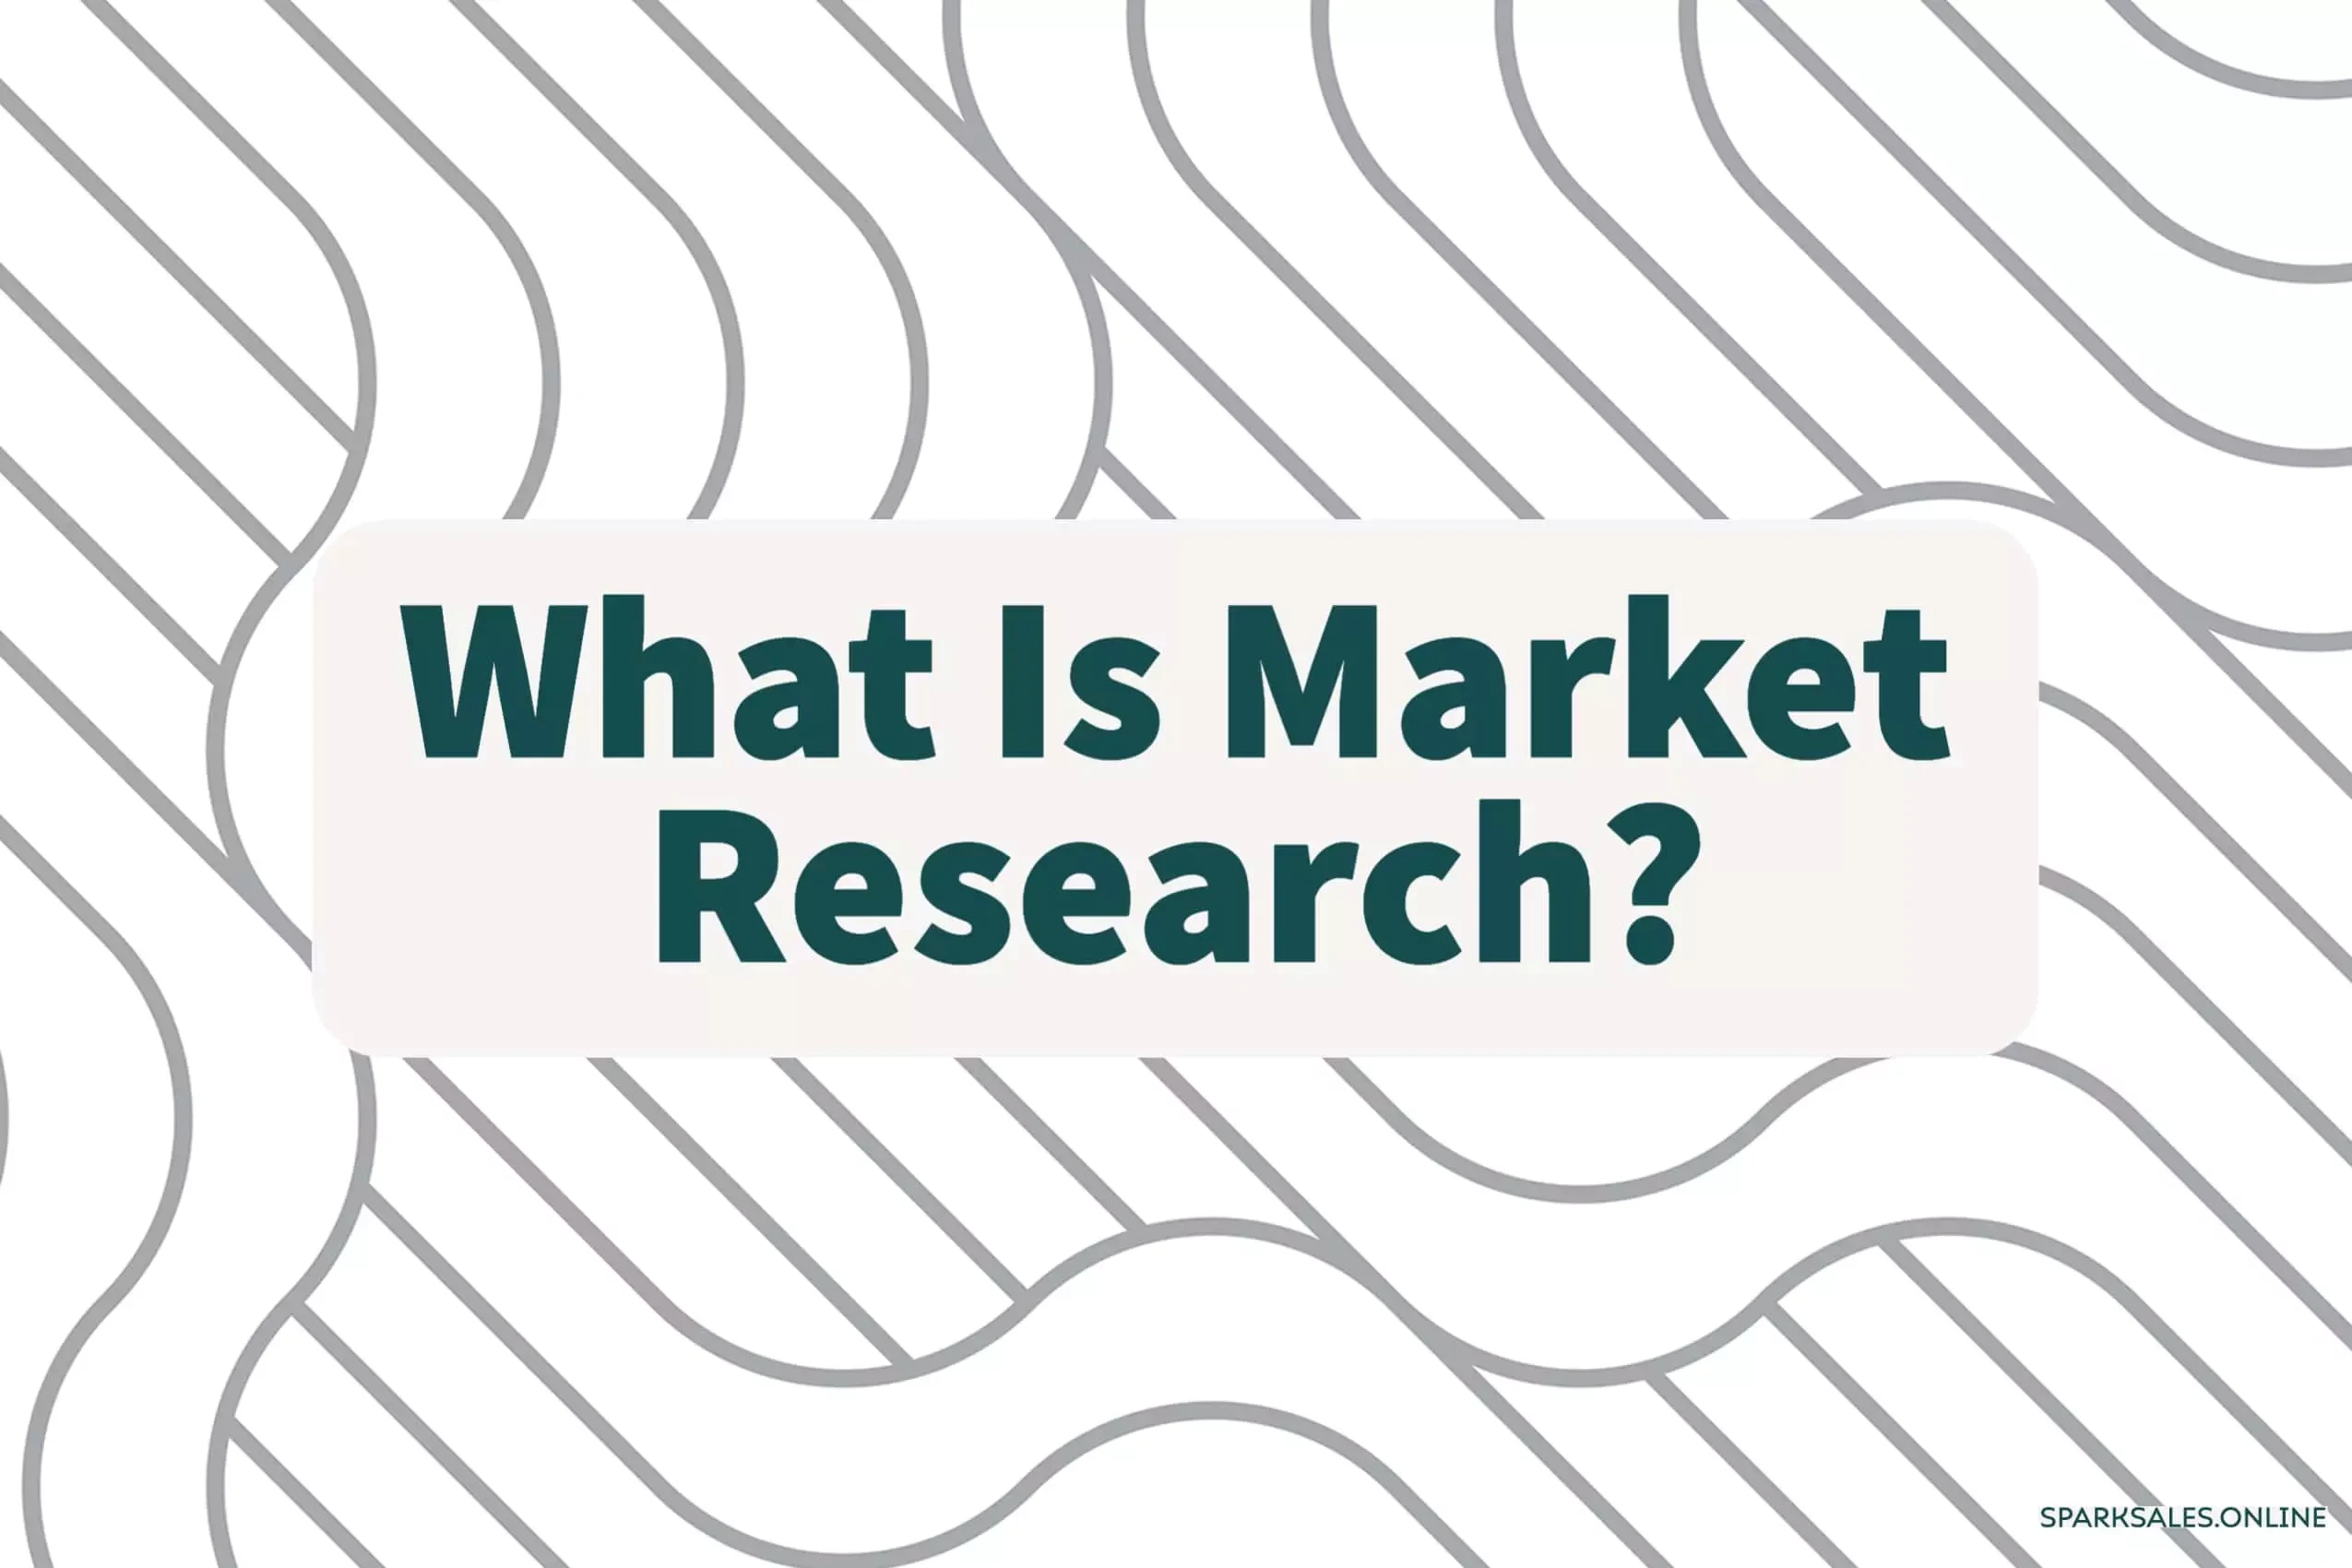 What Is Market Research?